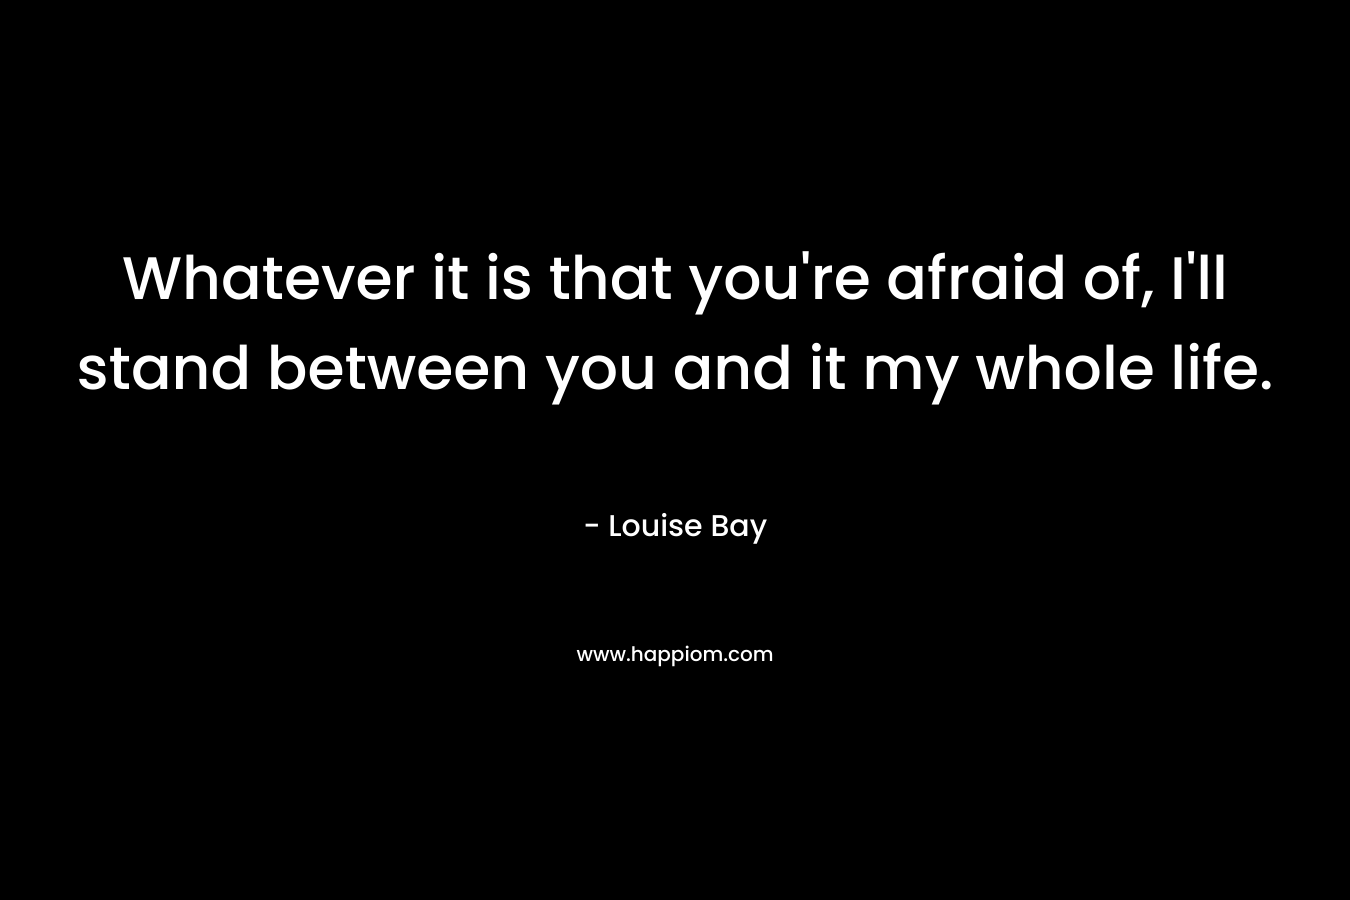 Whatever it is that you’re afraid of, I’ll stand between you and it my whole life. – Louise Bay